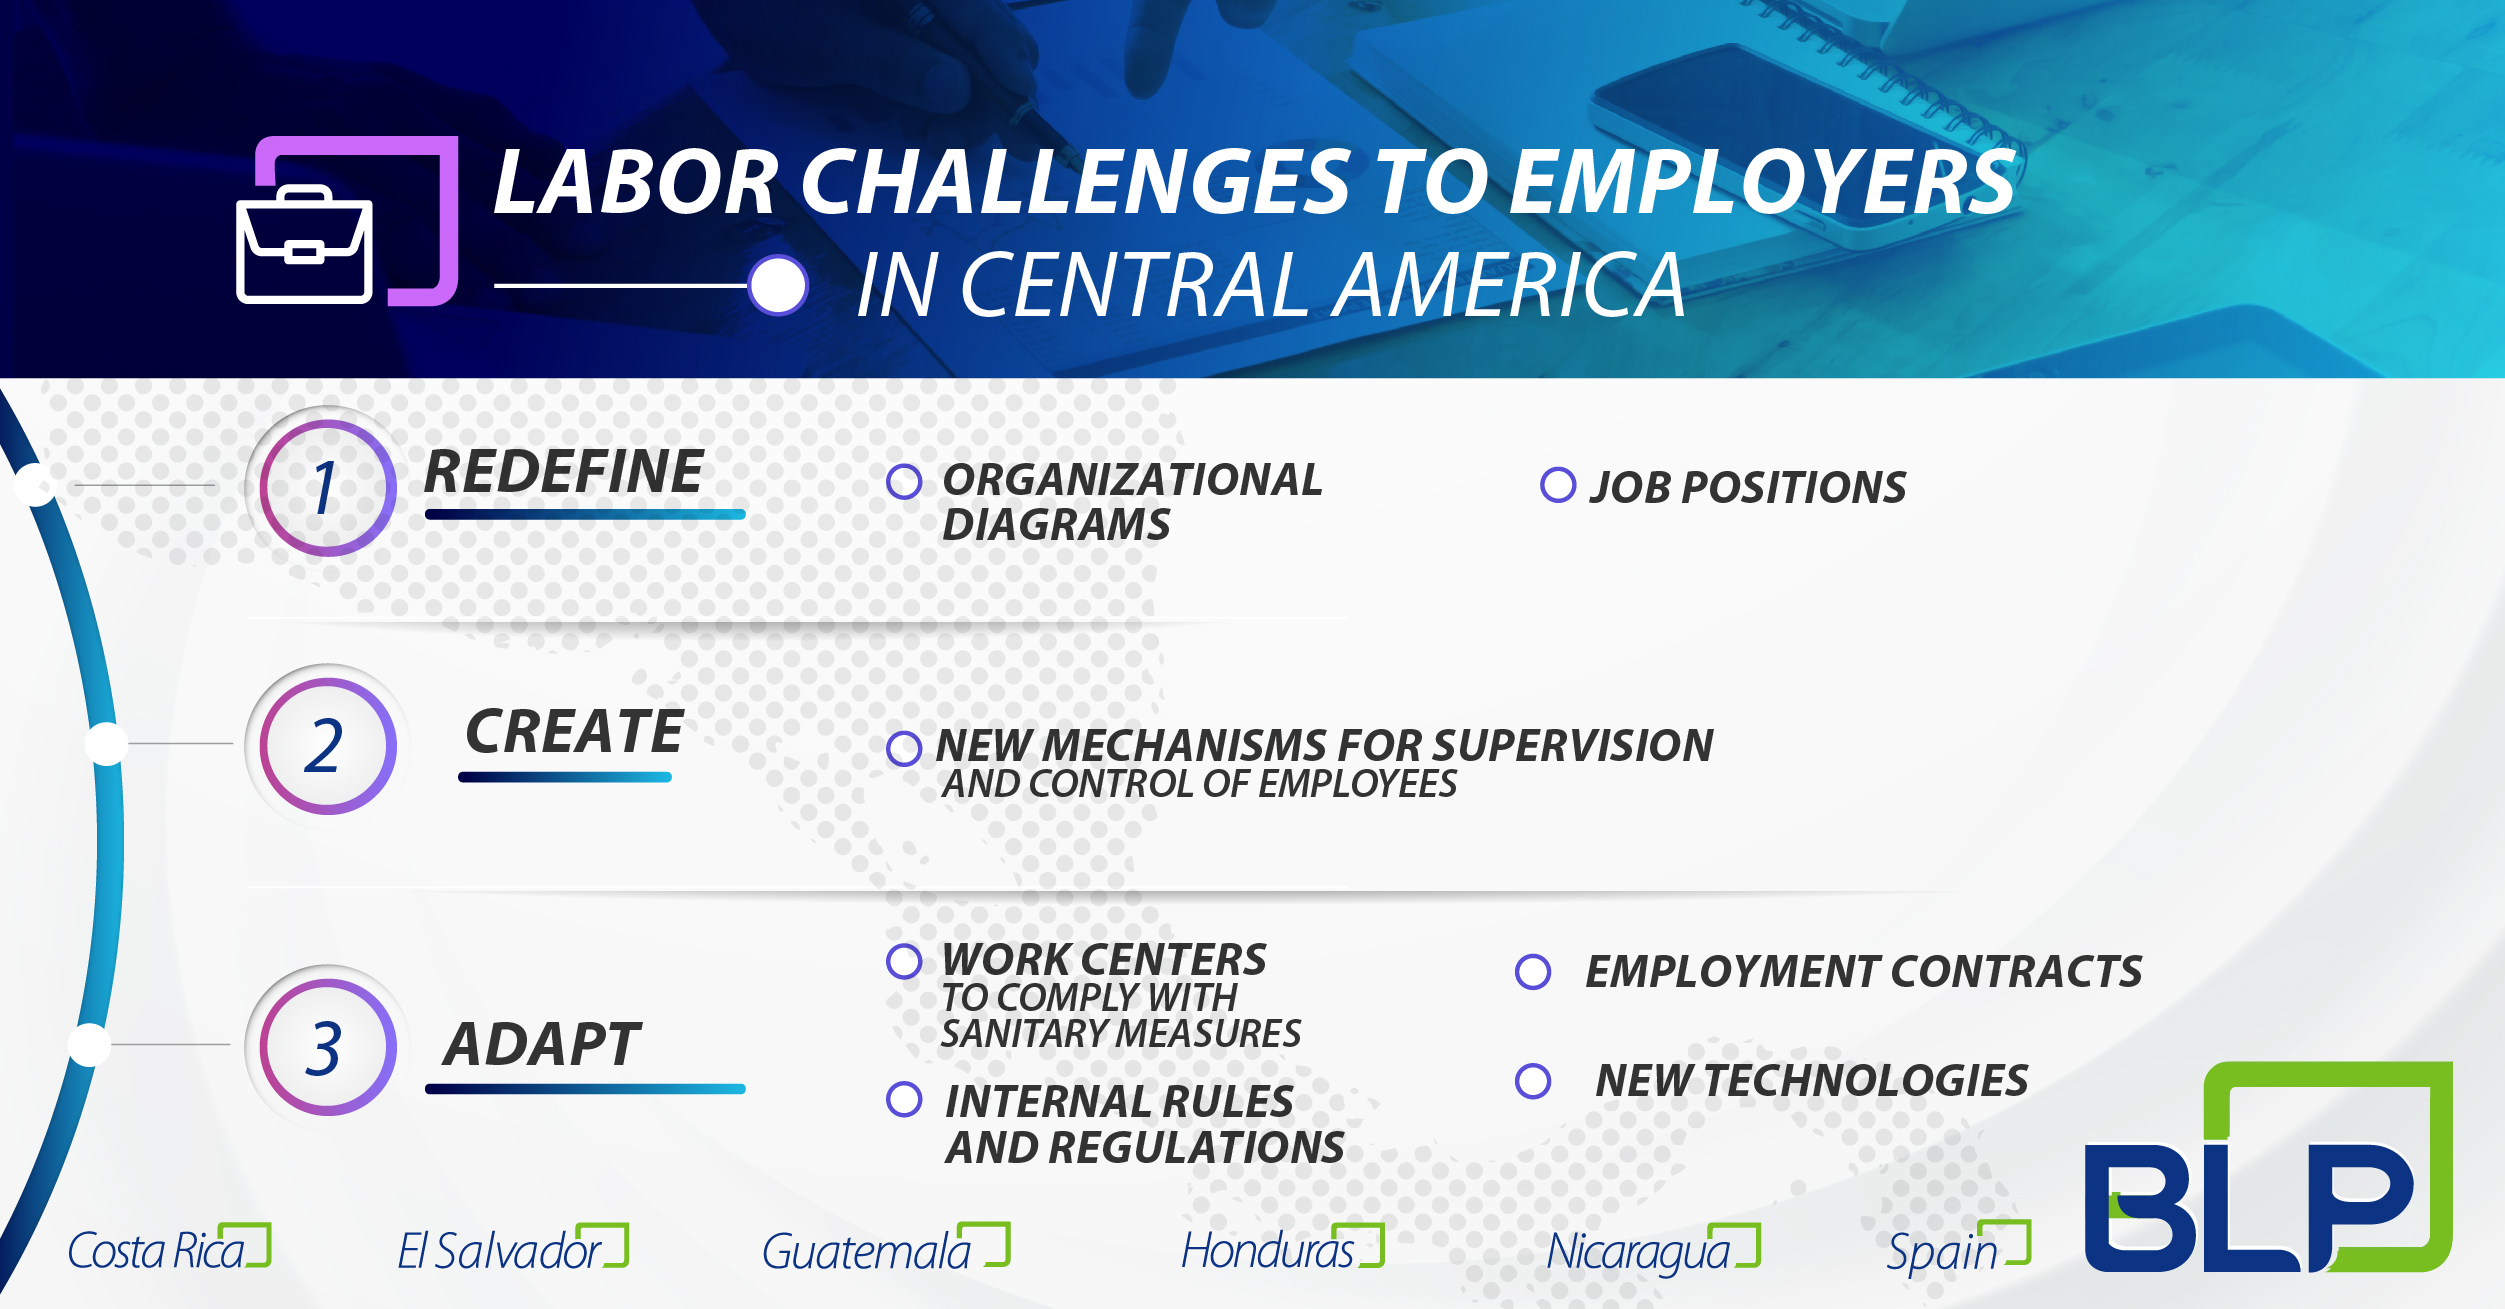 Labor challenges to employers in Central America